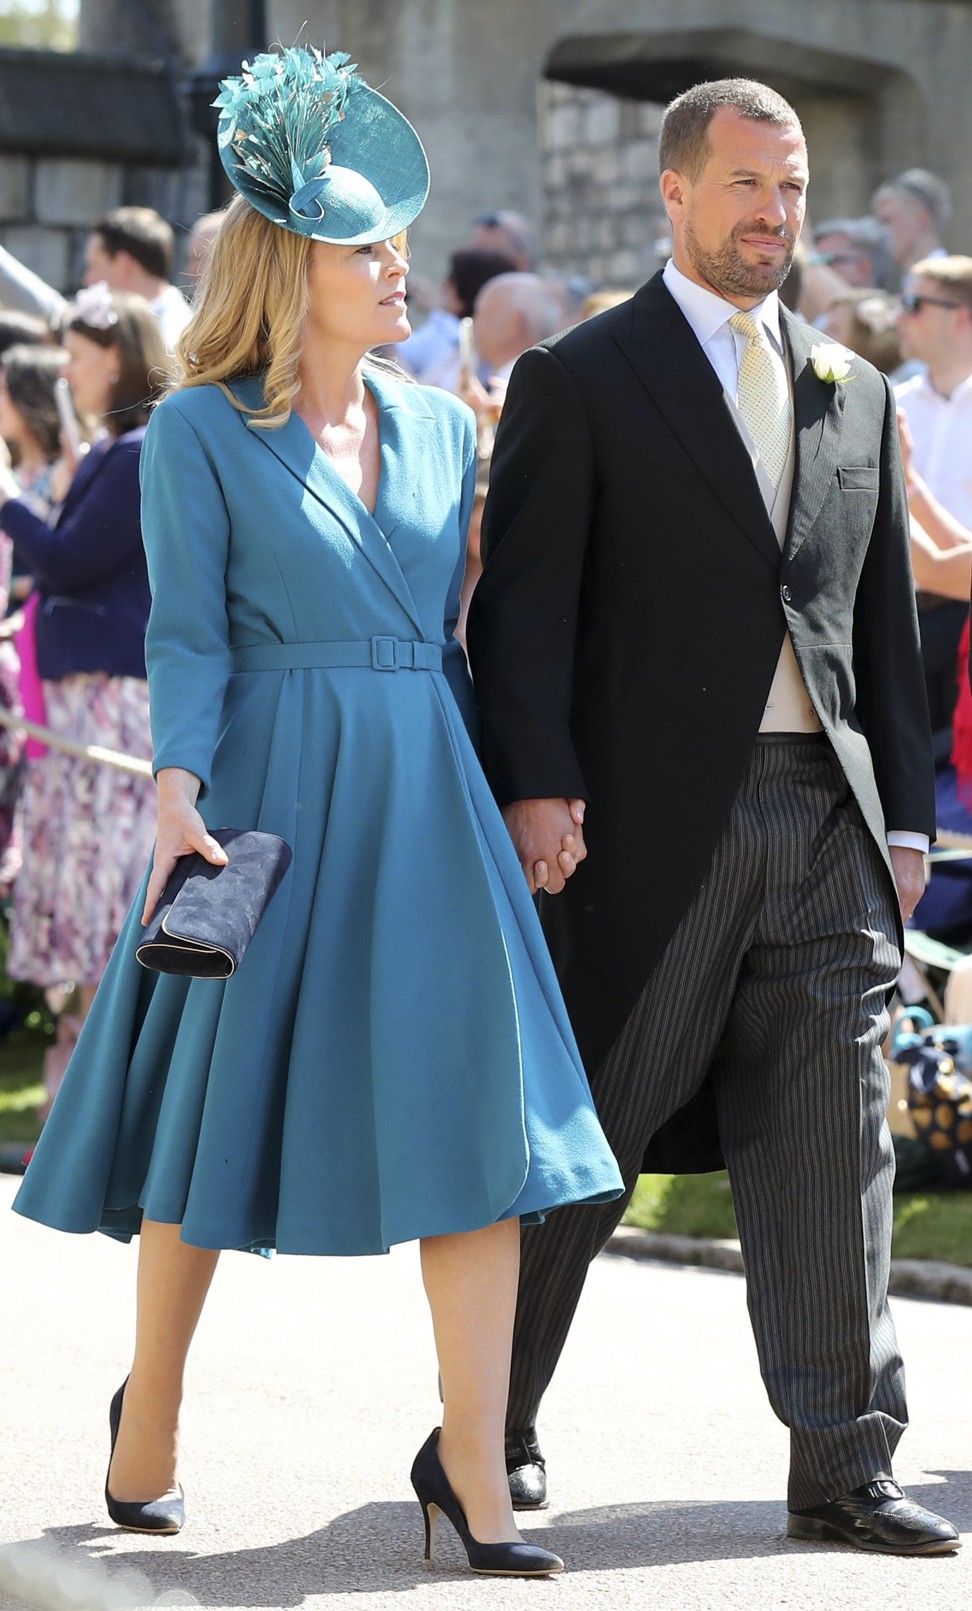 Peter Phillips and Autumn Phillips at the wedding ceremony of Prince Harry and Meghan Markle in 2018. File photo: AFP